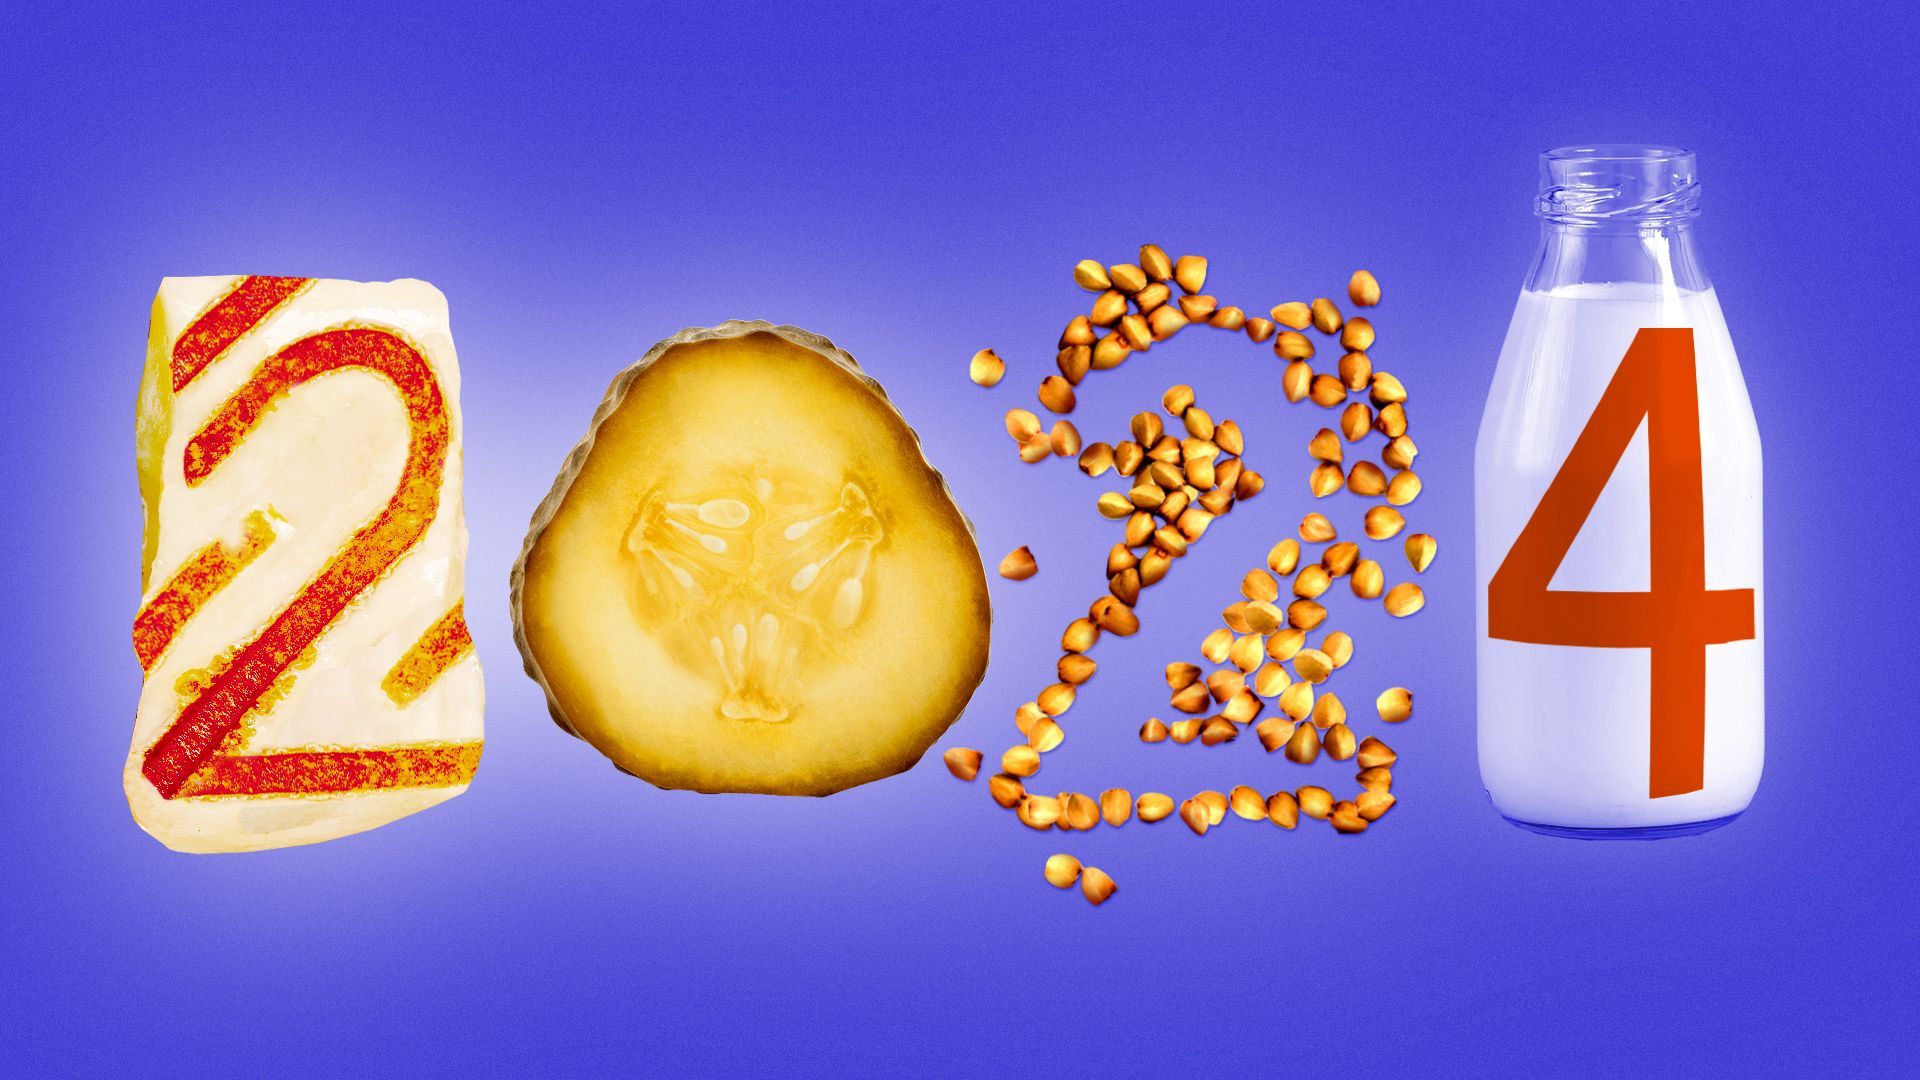 Illustration of the numbers 2024 formed by a piece of halloumi, a pickle, a pile of buckwheat, and a glass bottle of camel milk.